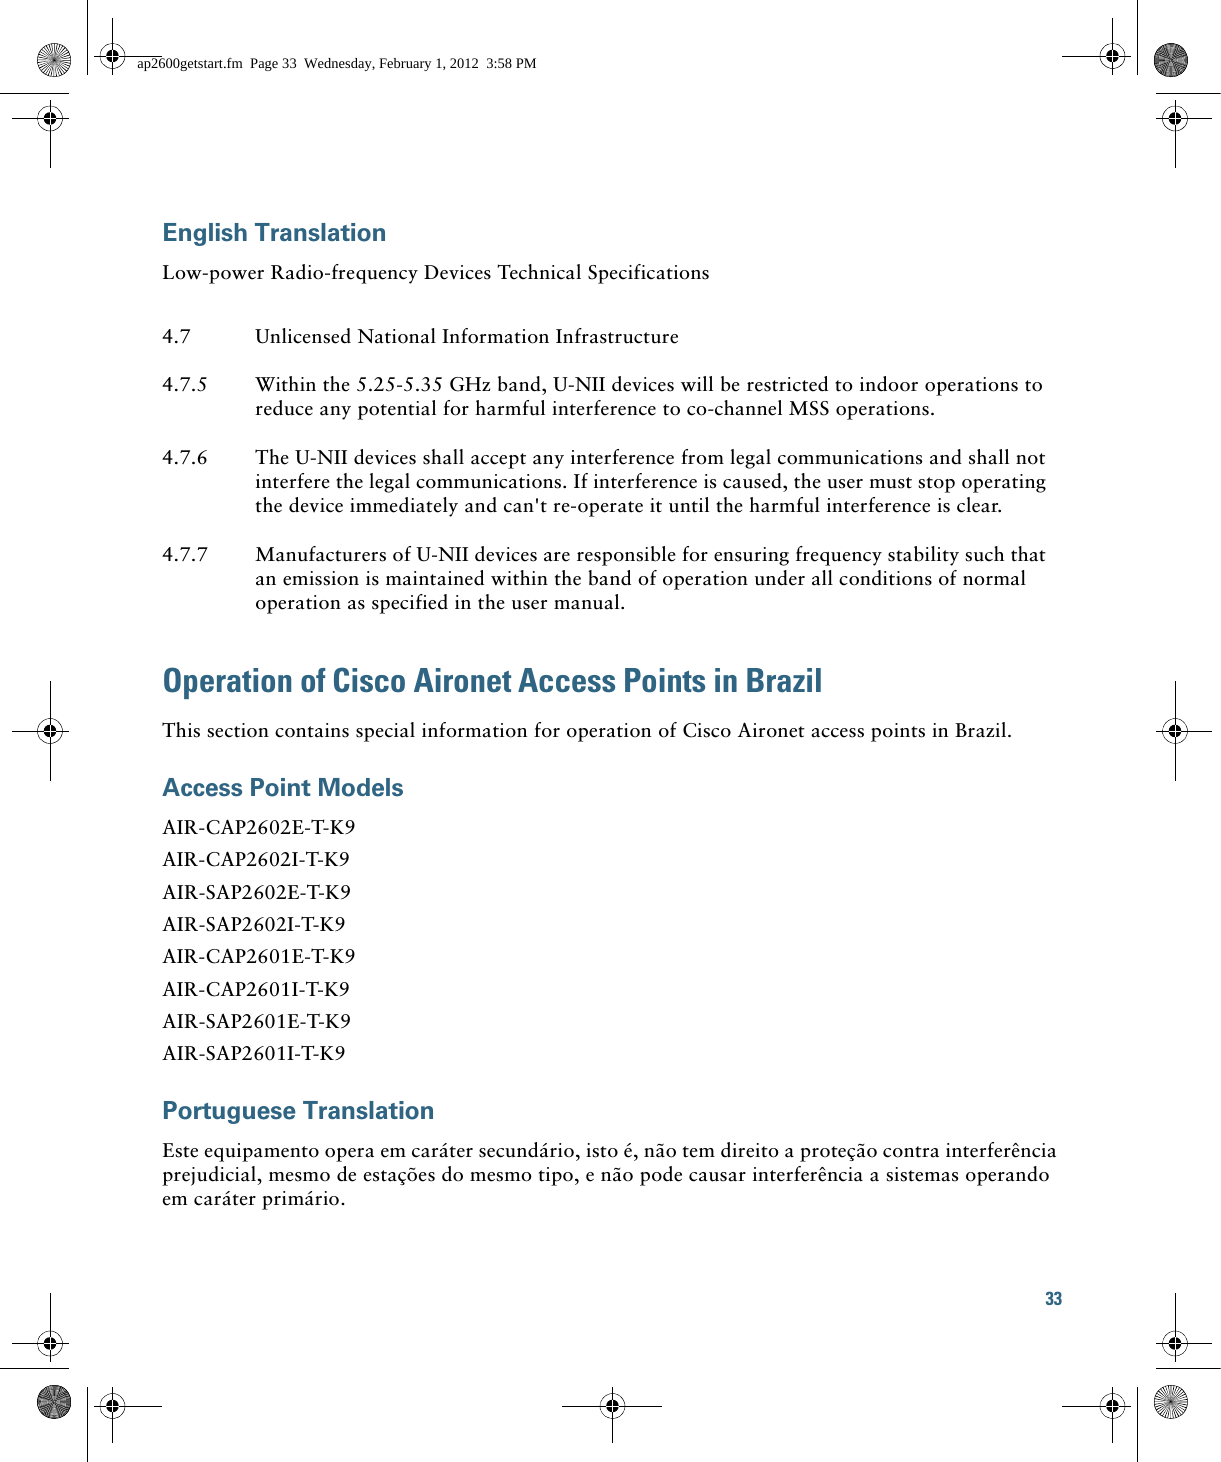 33 English TranslationLow-power Radio-frequency Devices Technical SpecificationsOperation of Cisco Aironet Access Points in BrazilThis section contains special information for operation of Cisco Aironet access points in Brazil.Access Point ModelsAIR-CAP2602E-T-K9AIR-CAP2602I-T-K9AIR-SAP2602E-T-K9AIR-SAP2602I-T-K9AIR-CAP2601E-T-K9AIR-CAP2601I-T-K9AIR-SAP2601E-T-K9AIR-SAP2601I-T-K9Portuguese TranslationEste equipamento opera em caráter secundário, isto é, não tem direito a proteção contra interferência prejudicial, mesmo de estações do mesmo tipo, e não pode causar interferência a sistemas operando em caráter primário.4.7 Unlicensed National Information Infrastructure4.7.5 Within the 5.25-5.35 GHz band, U-NII devices will be restricted to indoor operations to reduce any potential for harmful interference to co-channel MSS operations.4.7.6 The U-NII devices shall accept any interference from legal communications and shall not interfere the legal communications. If interference is caused, the user must stop operating the device immediately and can&apos;t re-operate it until the harmful interference is clear.4.7.7 Manufacturers of U-NII devices are responsible for ensuring frequency stability such that an emission is maintained within the band of operation under all conditions of normal operation as specified in the user manual.ap2600getstart.fm  Page 33  Wednesday, February 1, 2012  3:58 PM